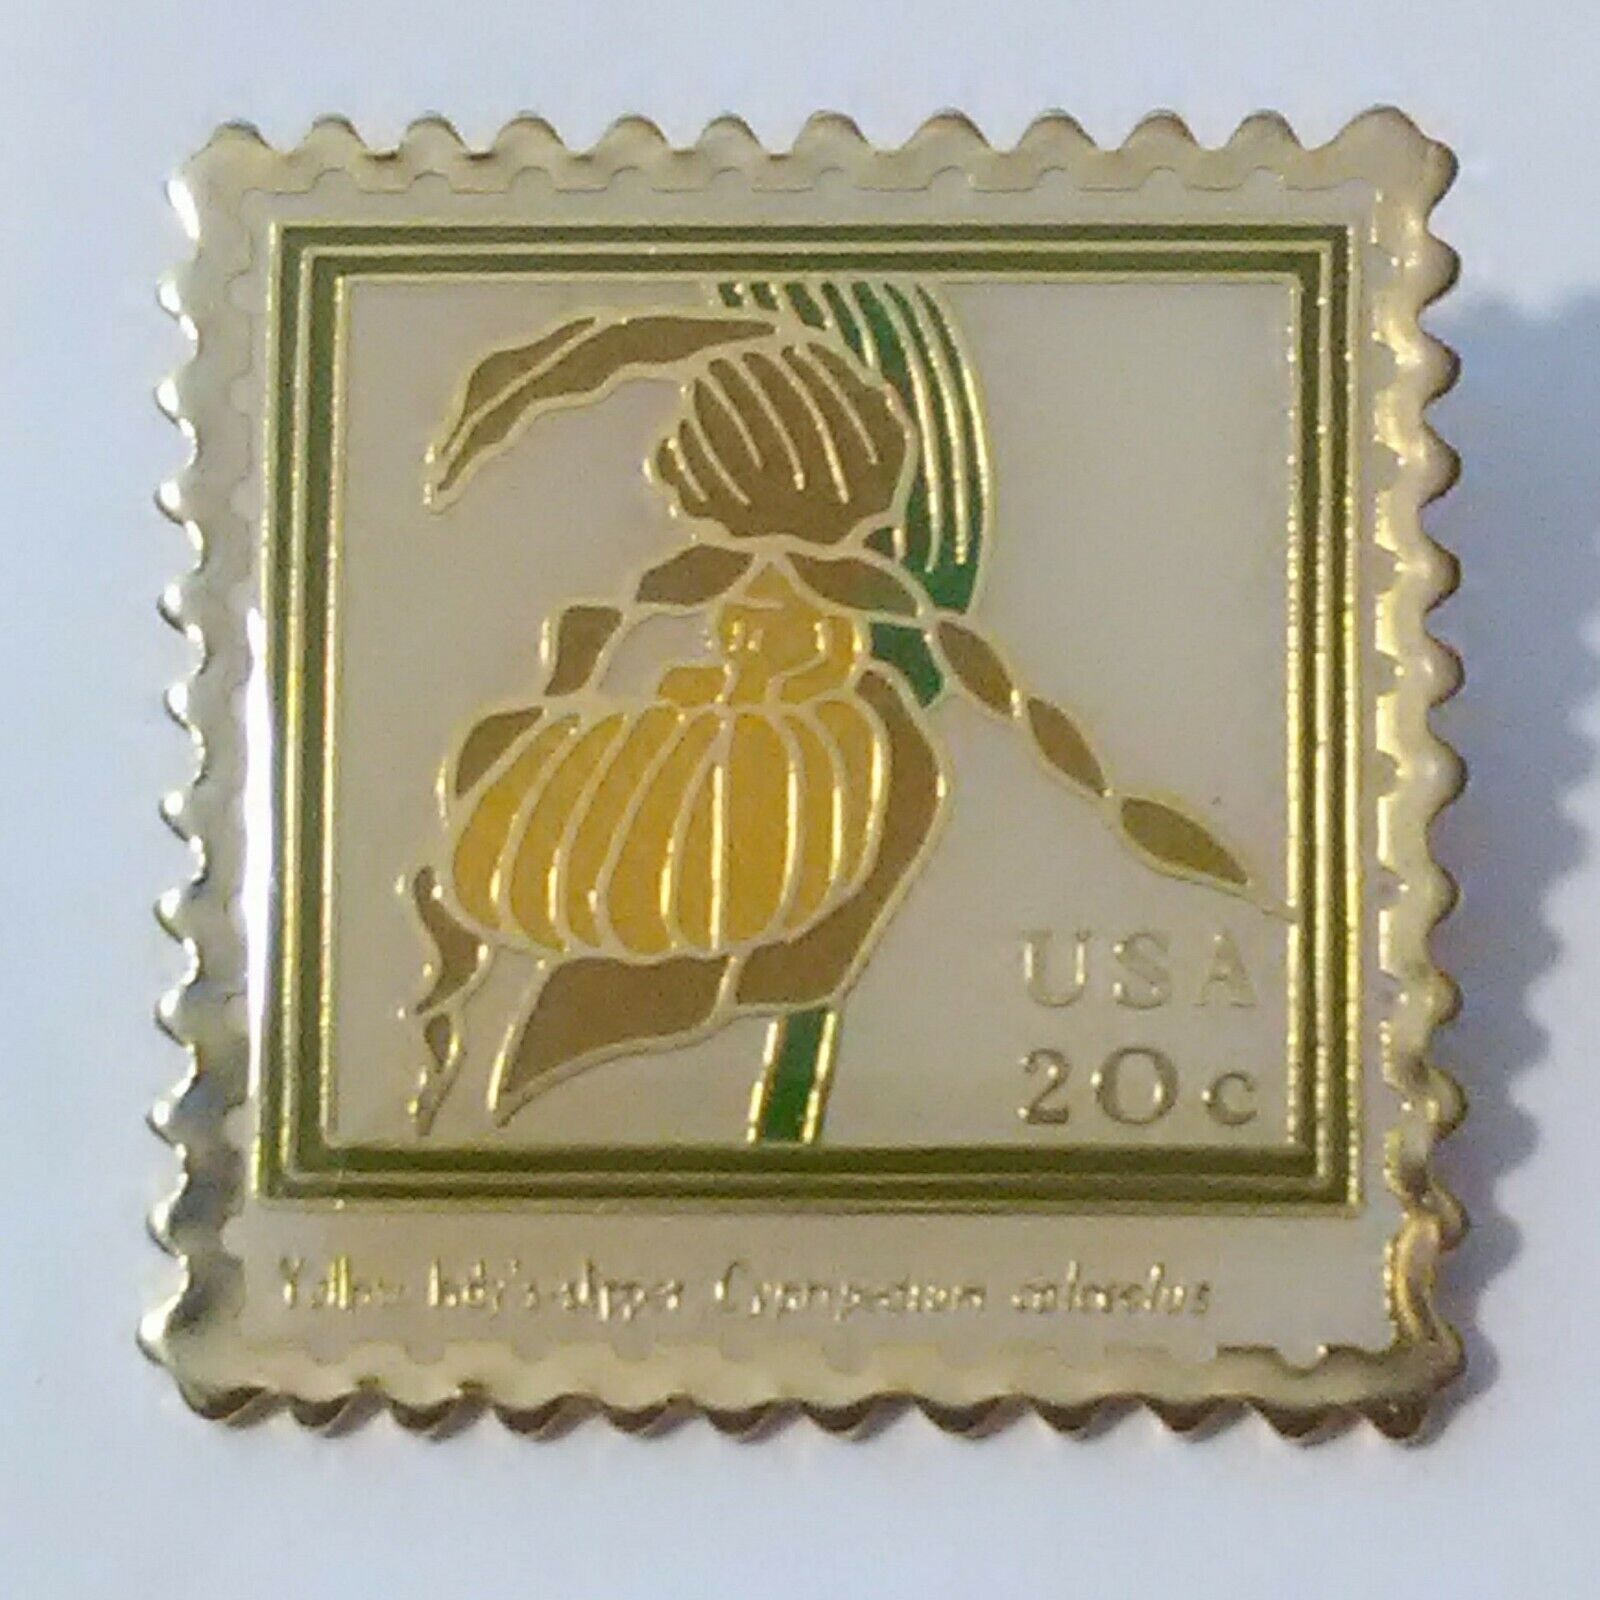 1984 USPS YELLOW HDYS SIPPER CYPRIPEDIUM CALCECLUS LOGO PIN GREAT FOR COLLECTION